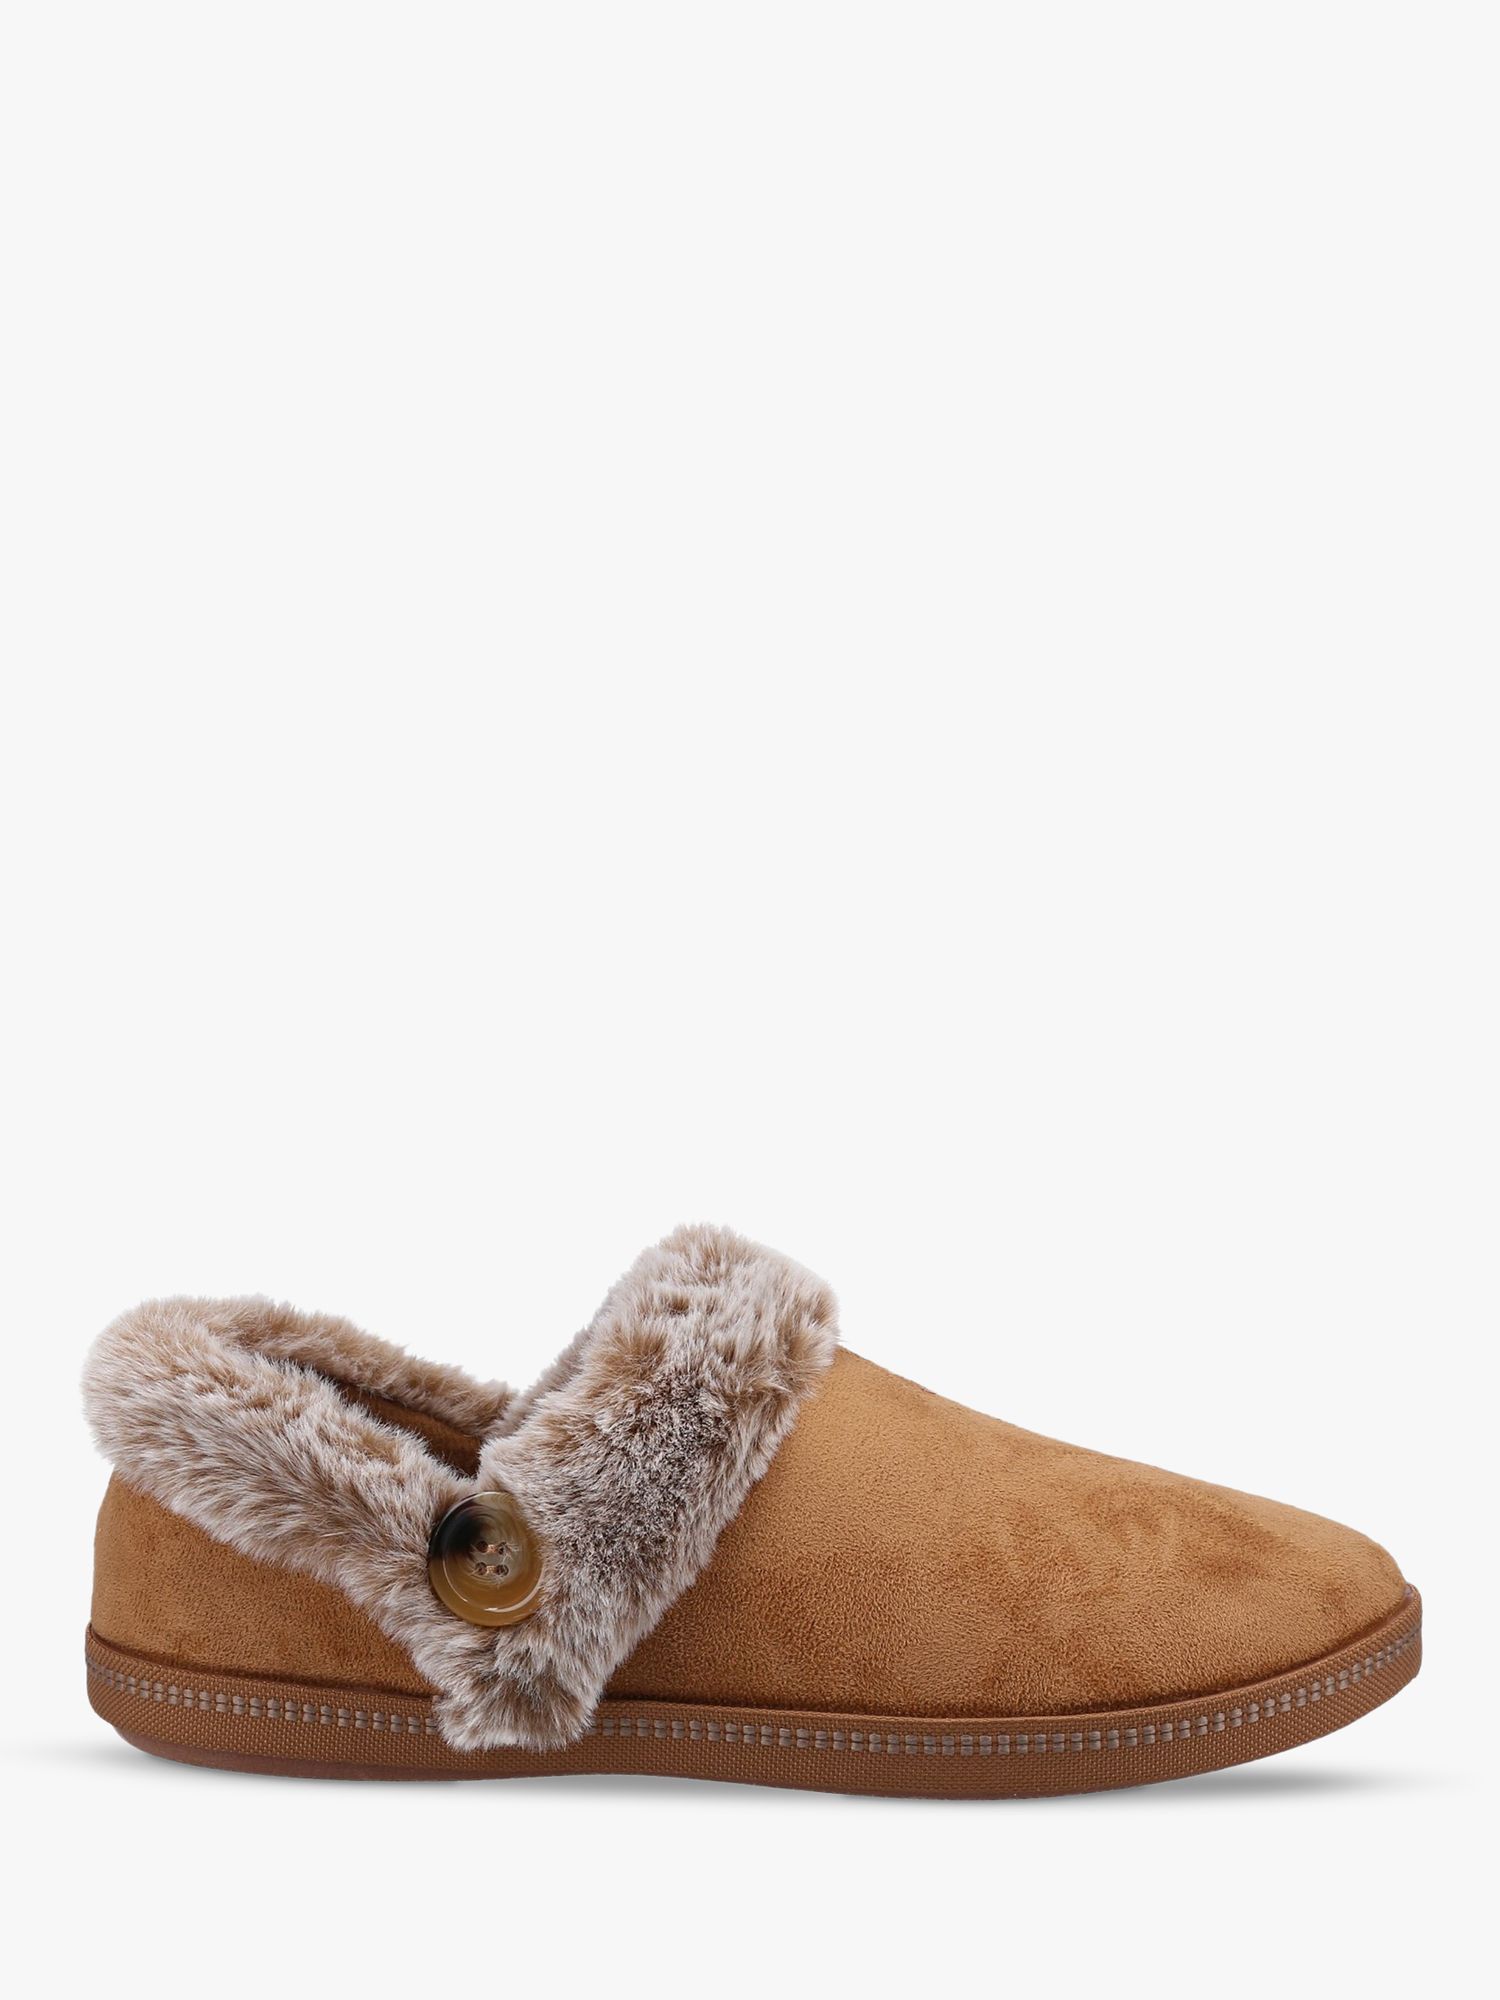 Skechers Cozy Campfire Fresh Toast Slippers, Chestnut at John Lewis ...